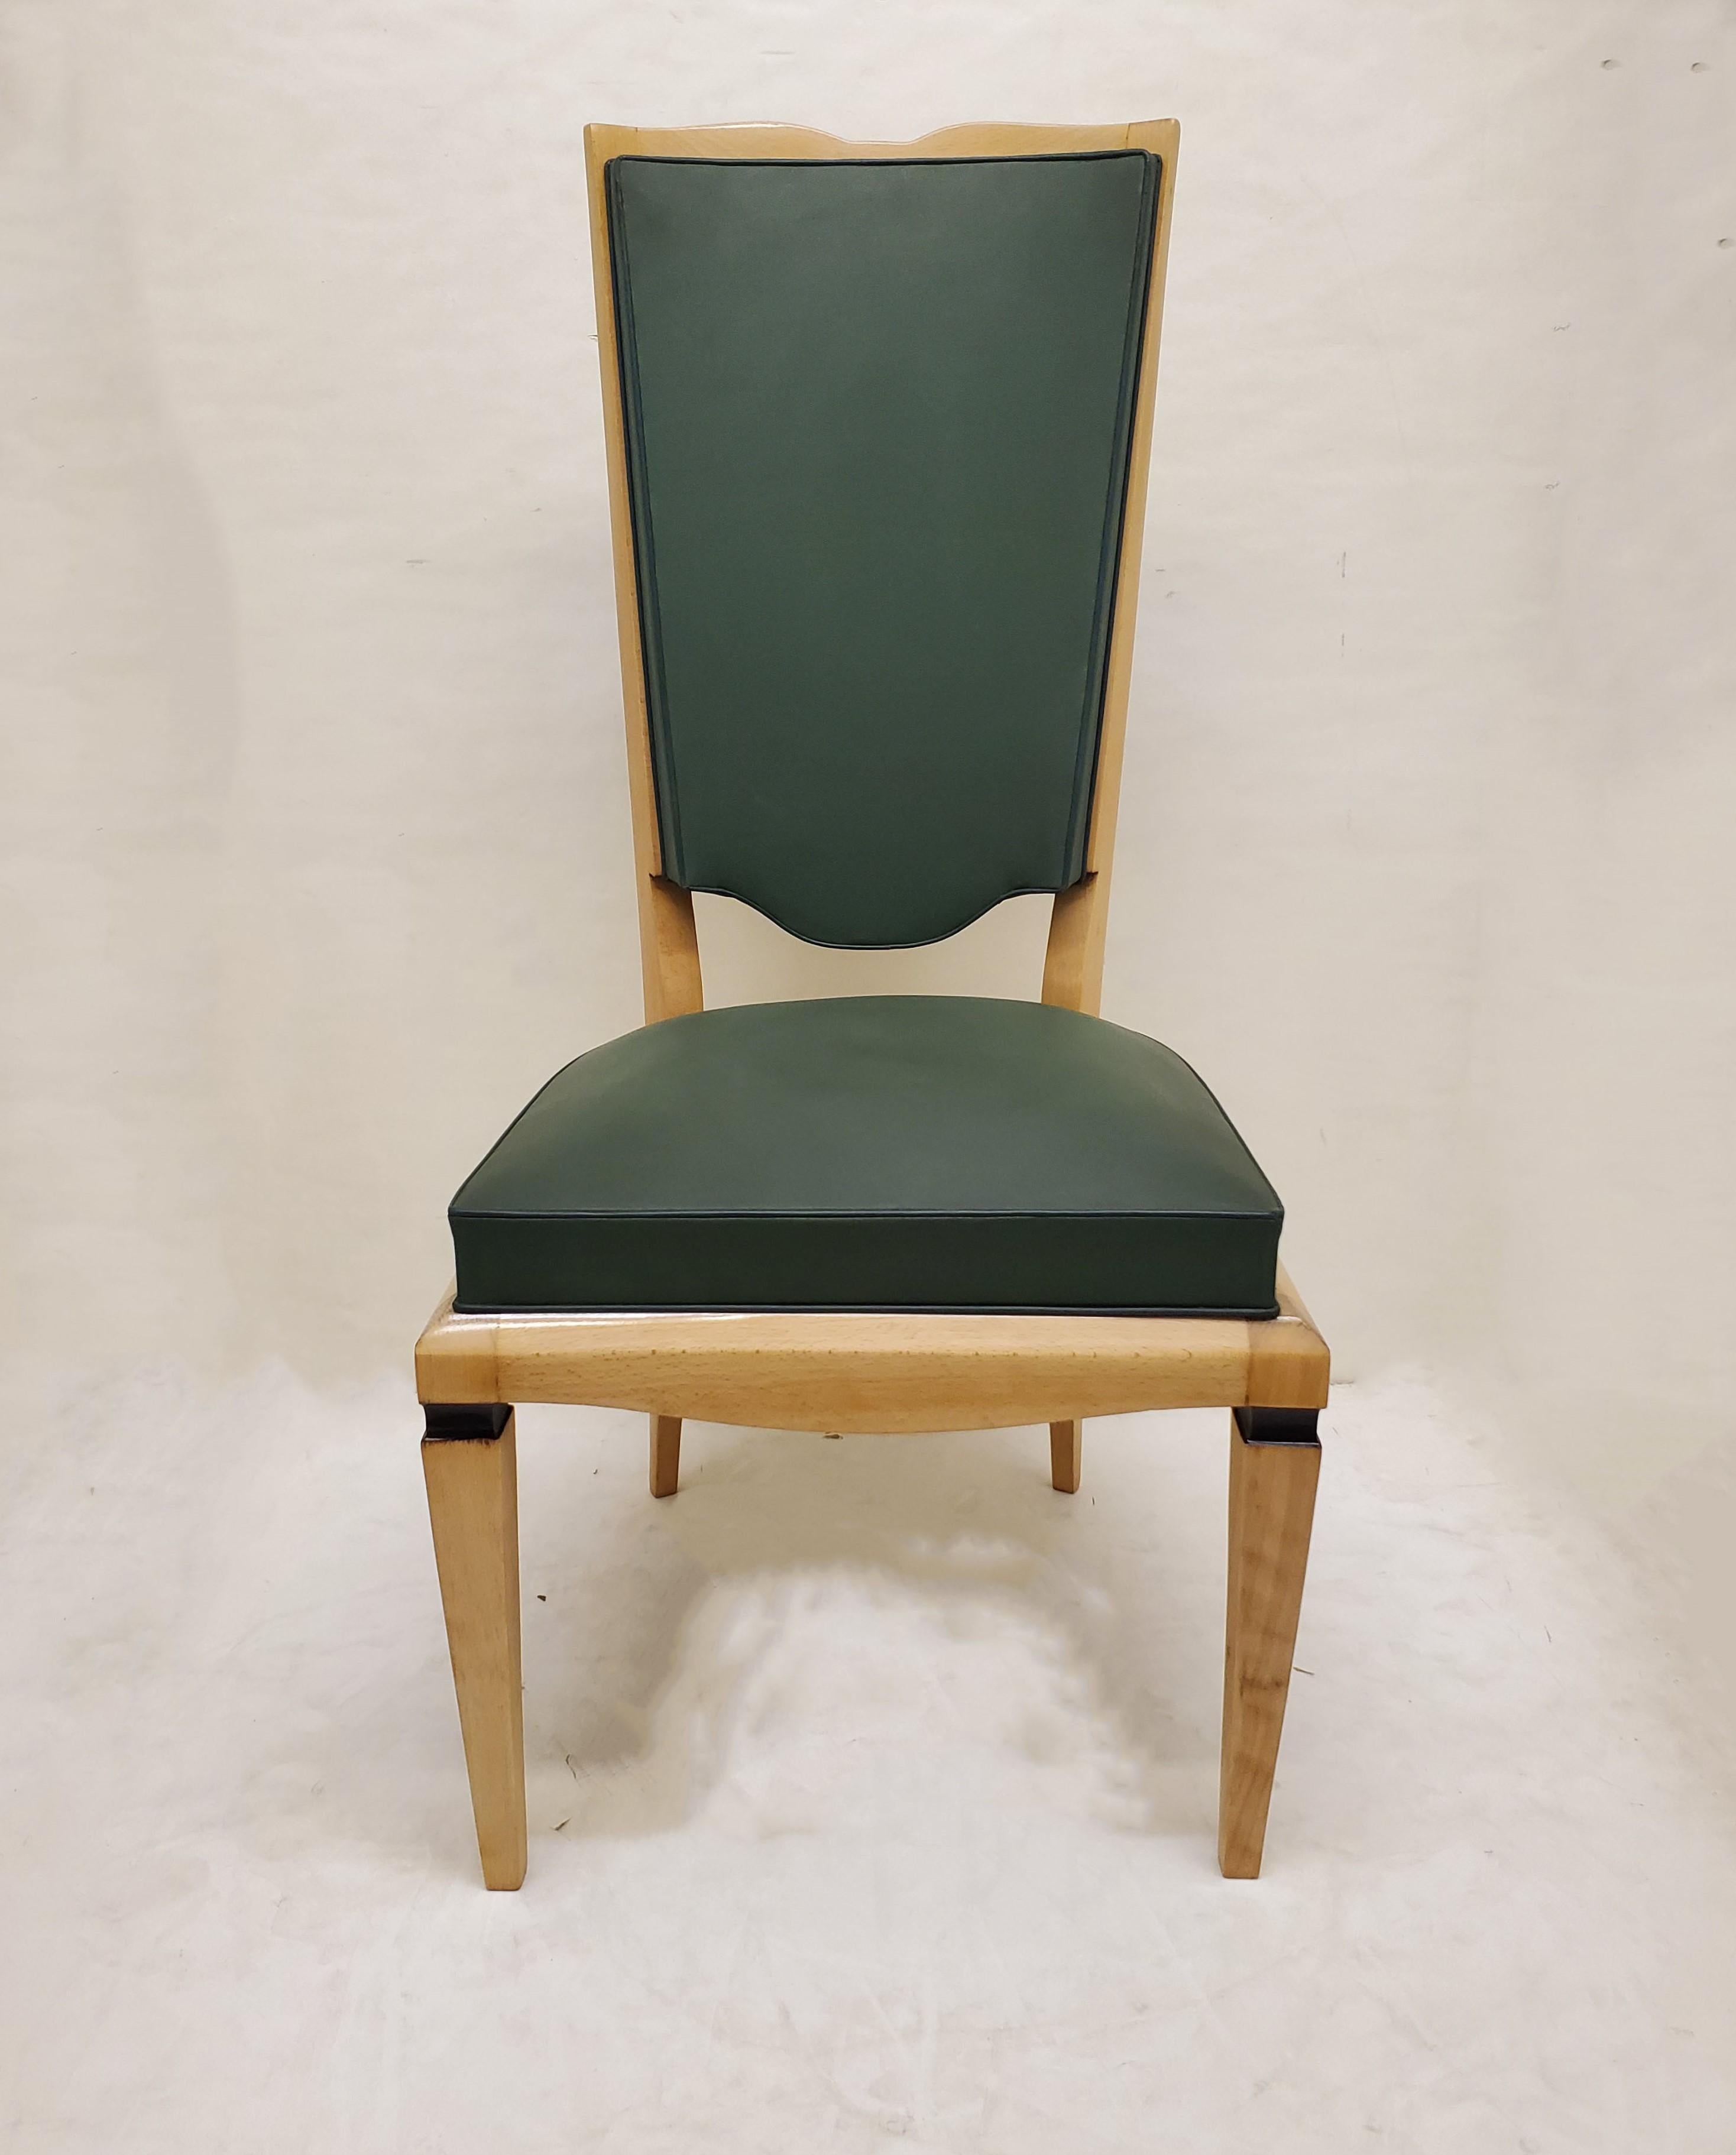 A beautiful set of six original French Art Deco tall back blonde wood dining chairs attributed to Maurice Jallot.
Tall elegant backs with curvilinear top crest and shield shape lower backrest, featuring elegant tapered tubular front legs and